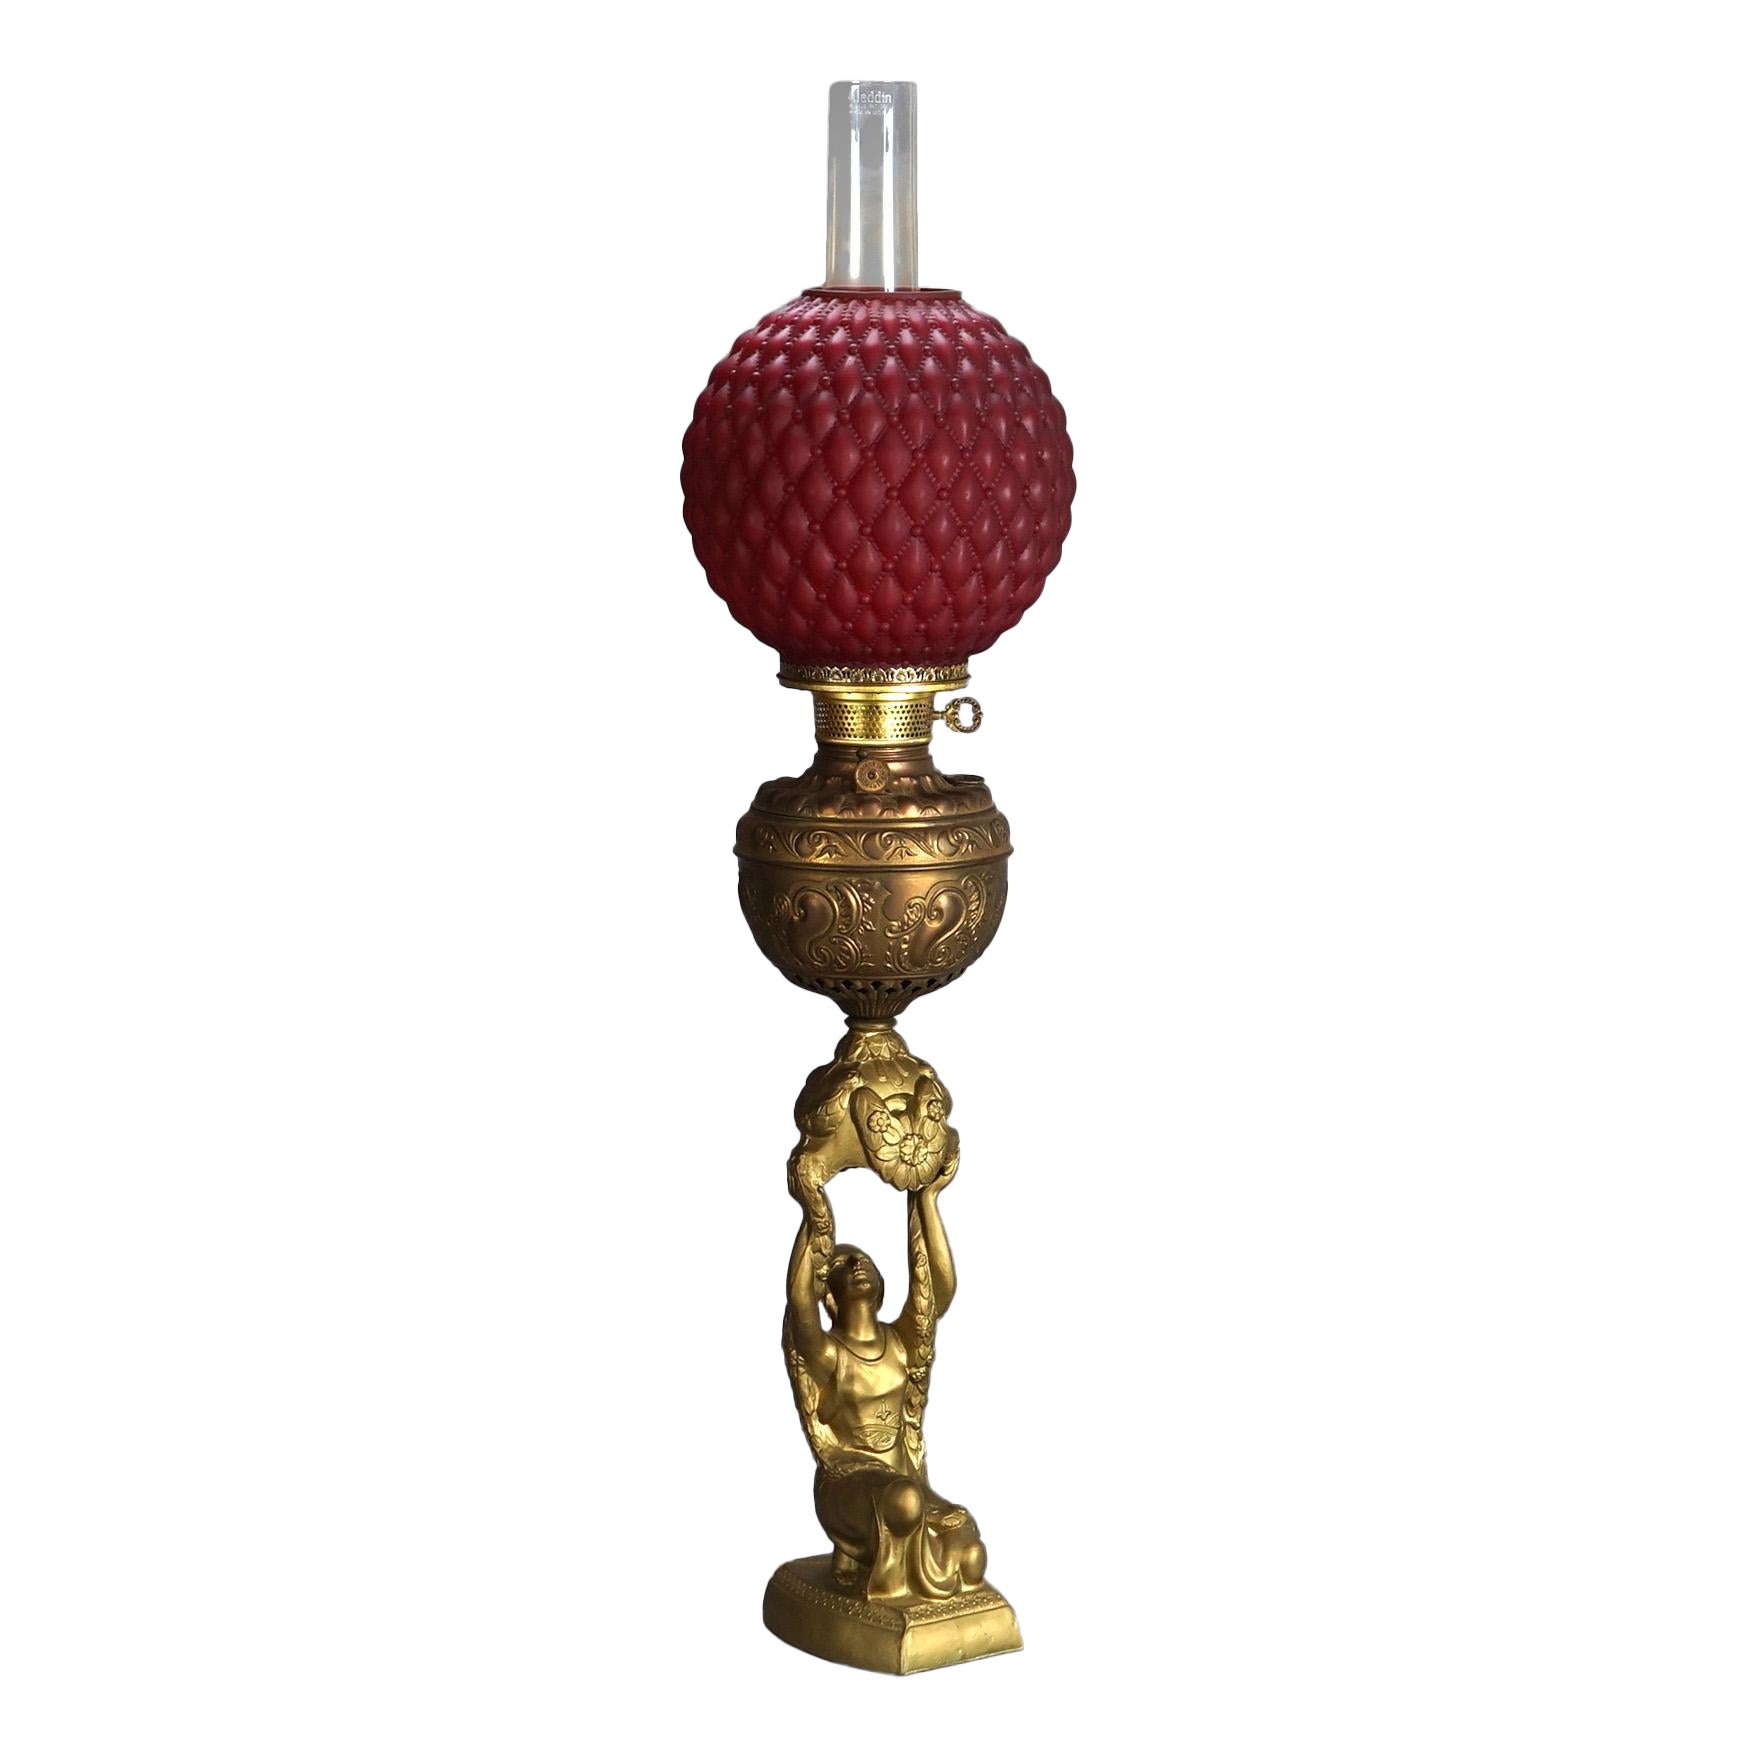 Antique Figural Gilt Metal Parlor Lamp with Quilted Red Glass Shade Circa 1900